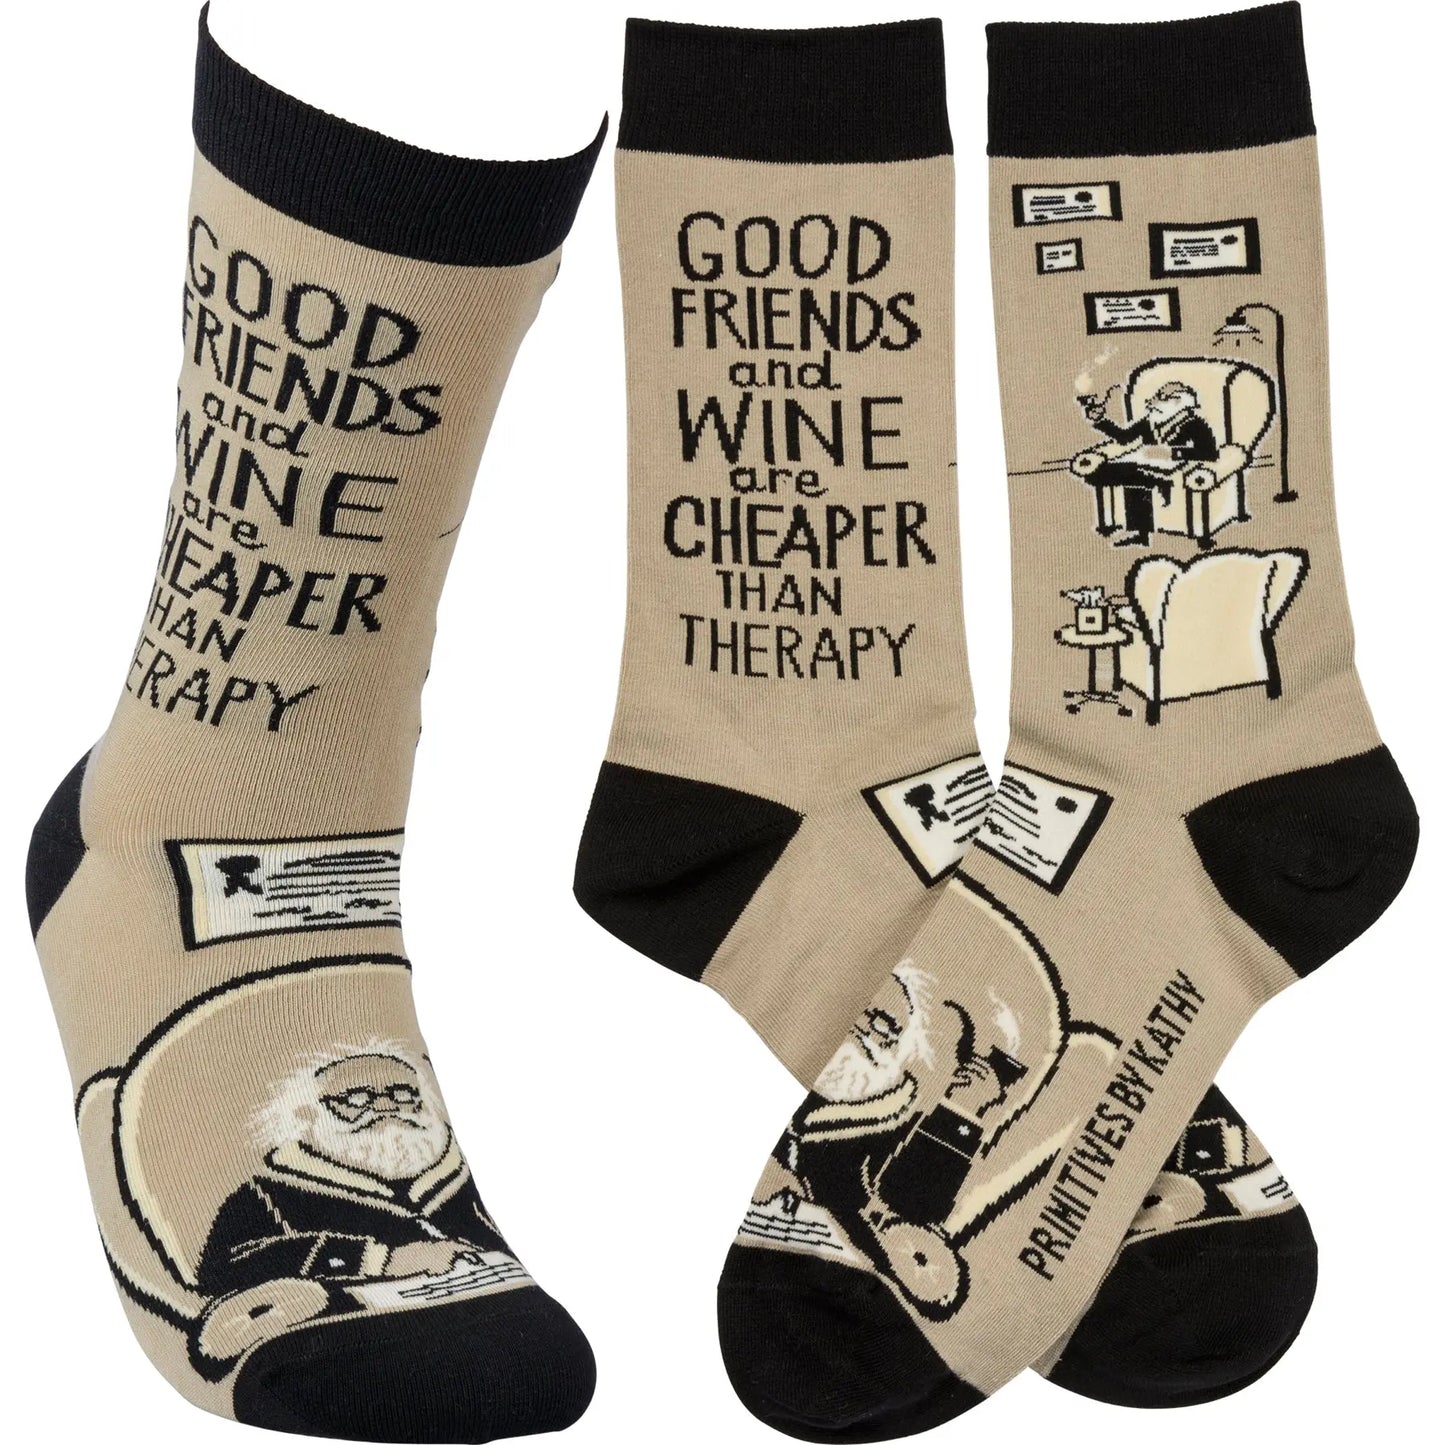 Primitives By Kathy - "Good Friends And Wine" Socks PRIMITIVES BY KATHY